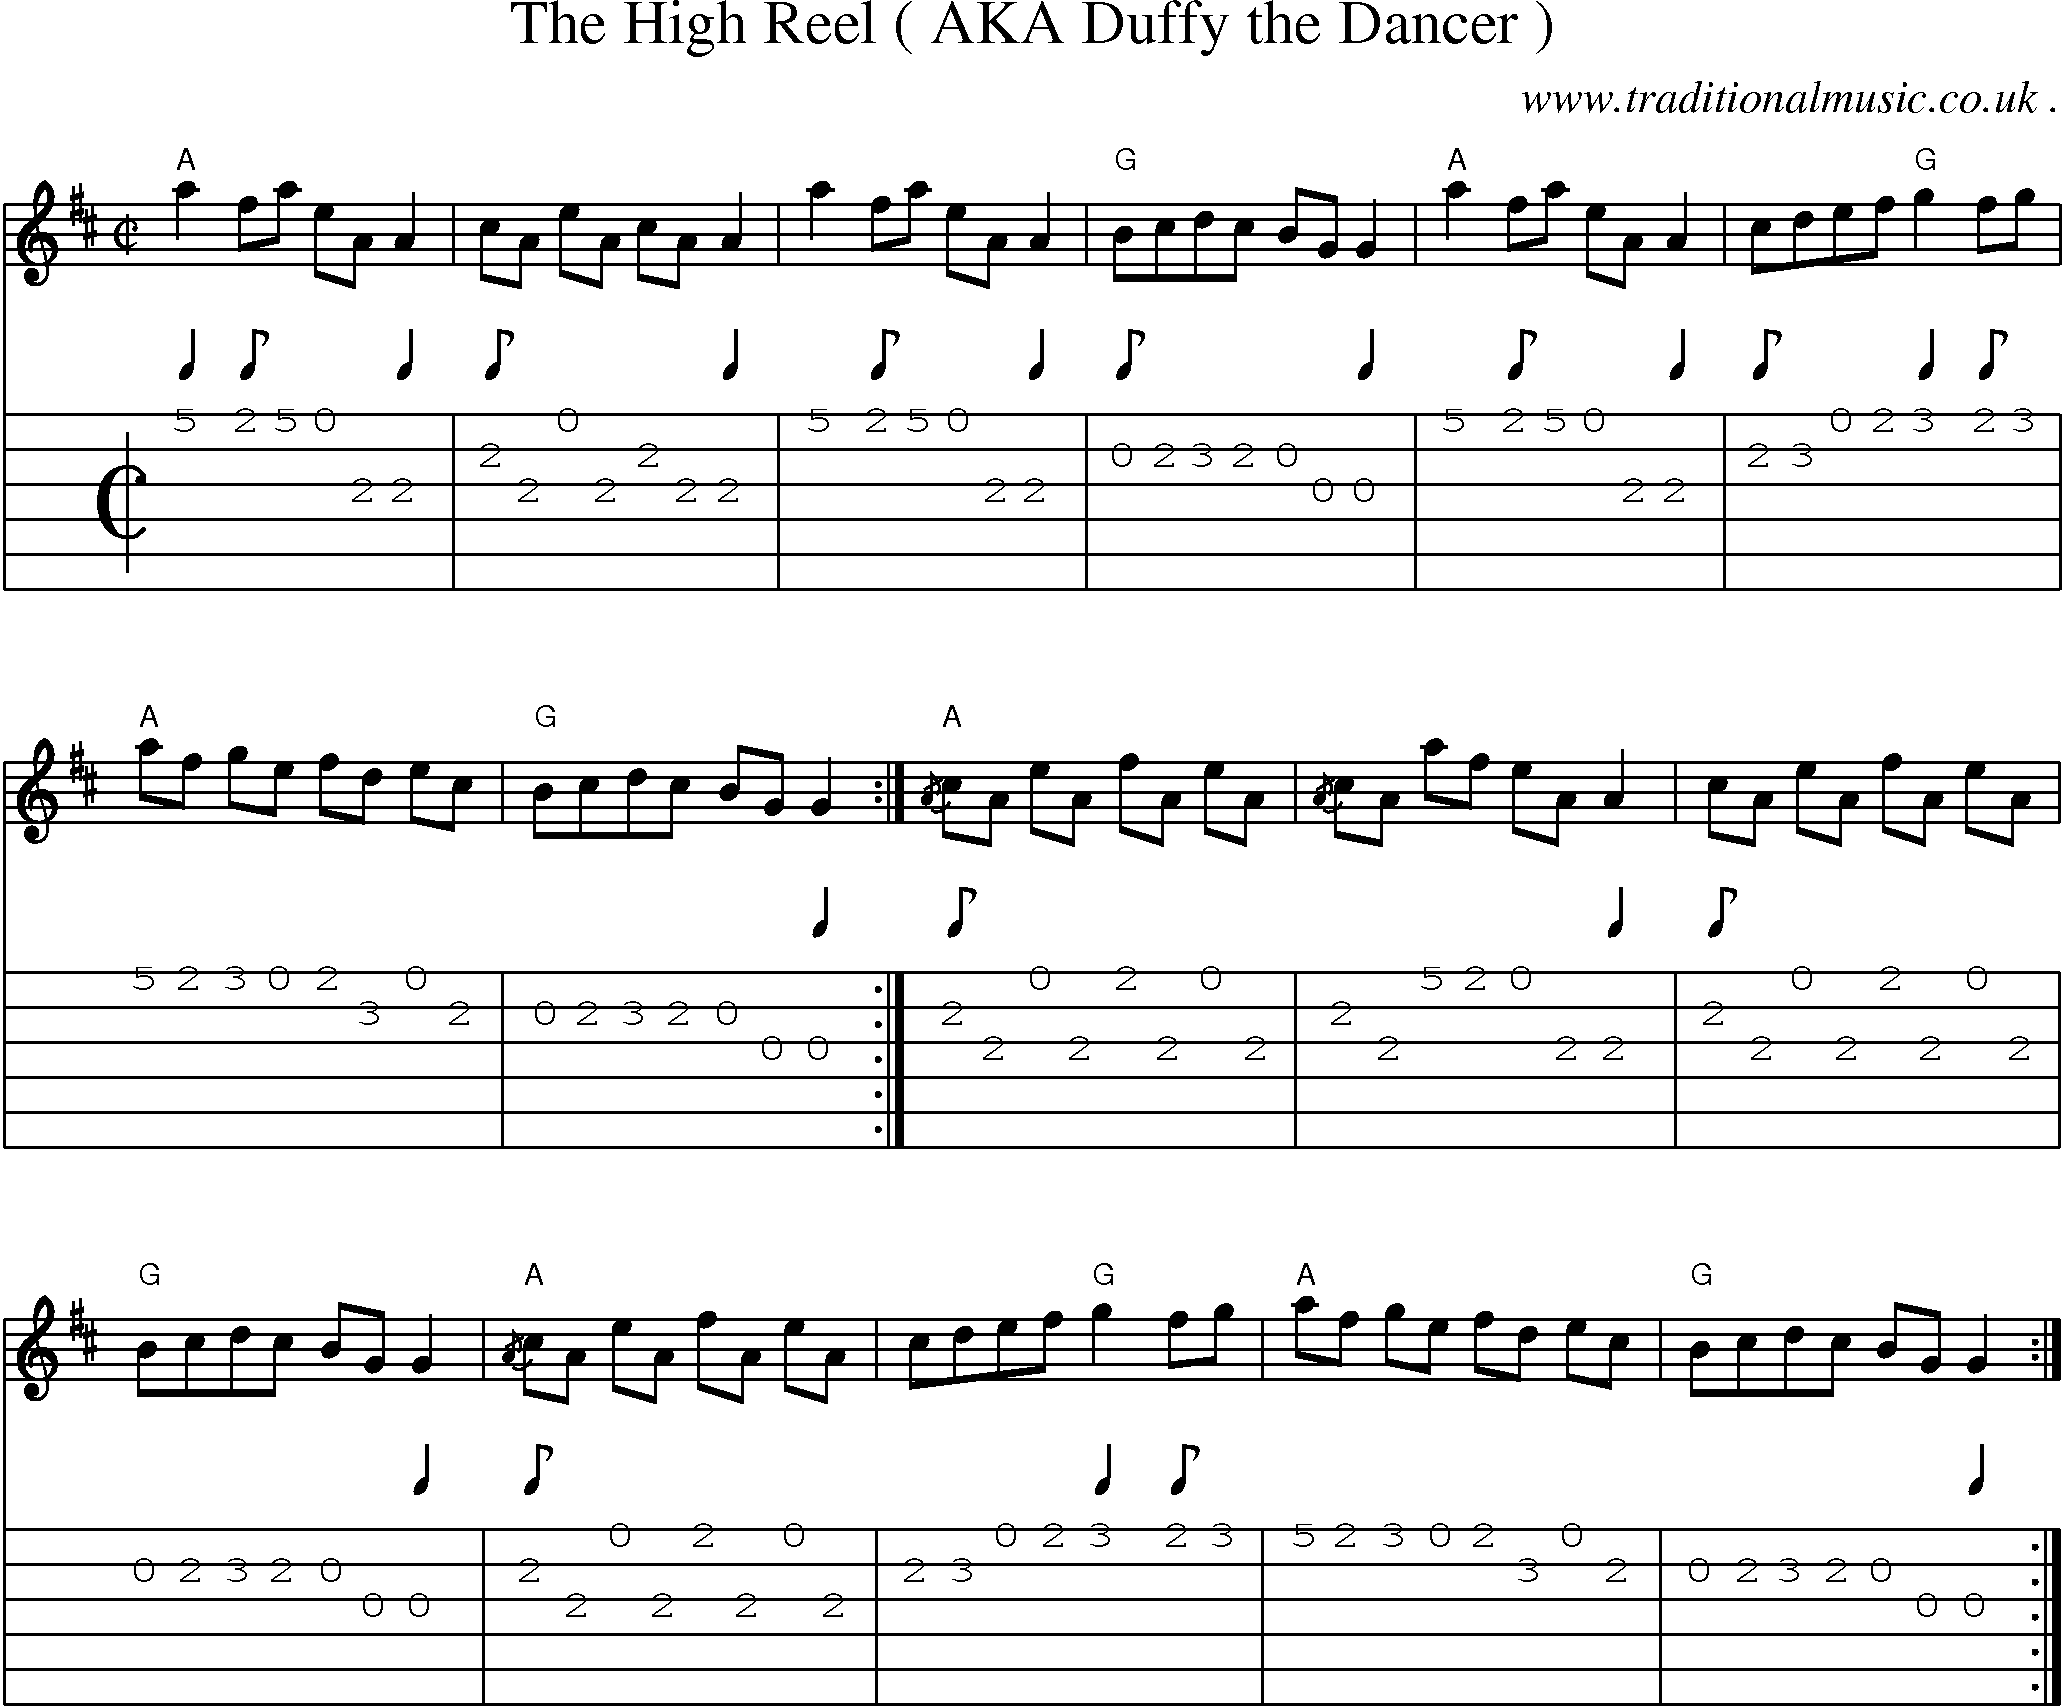 Music Score and Guitar Tabs for The High Reel Aka Duffy The Dancer